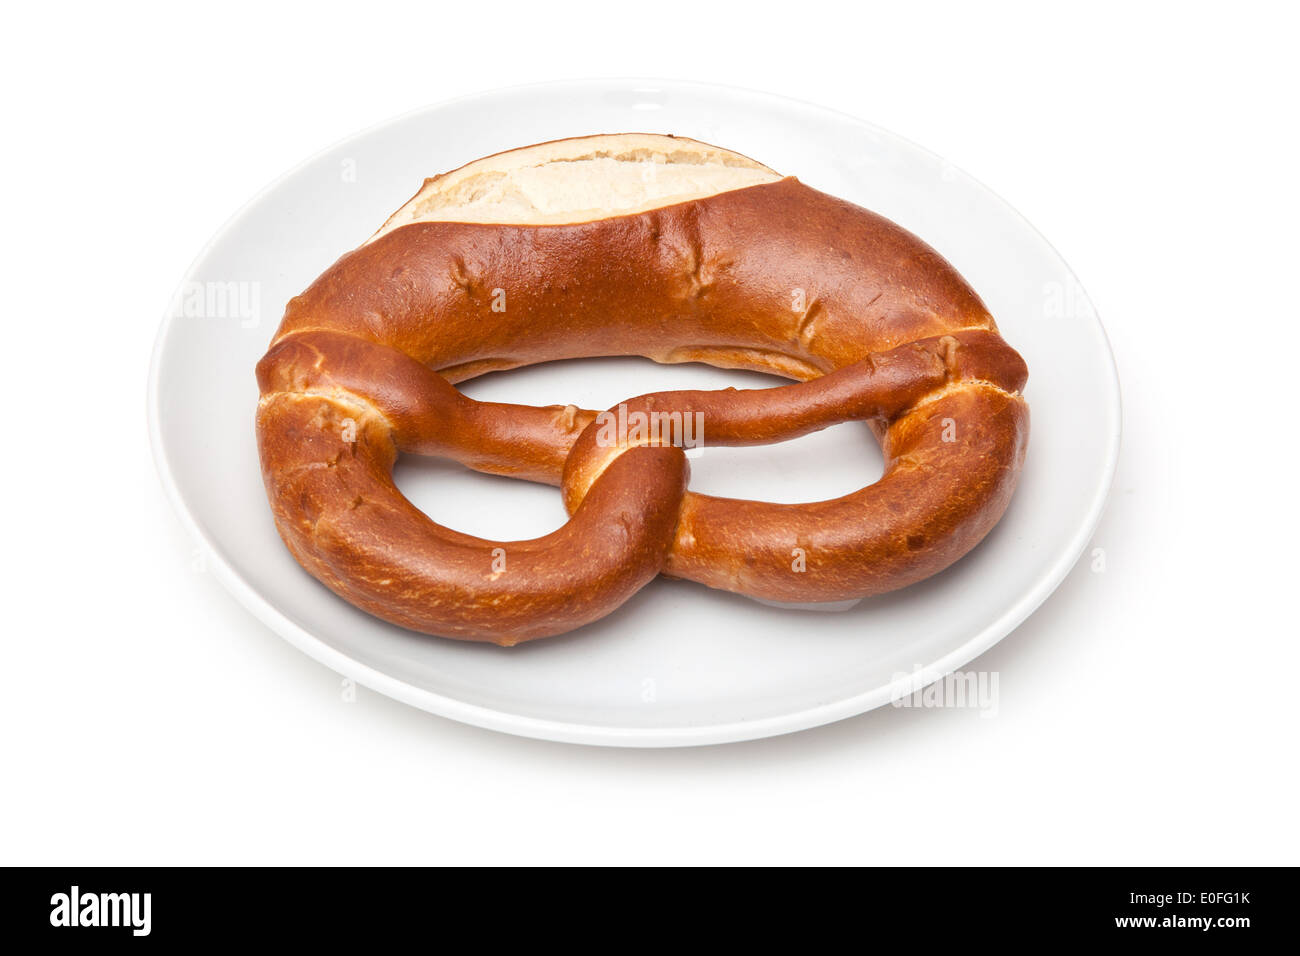 Traditional German Pretzel on a white plate. Stock Photo